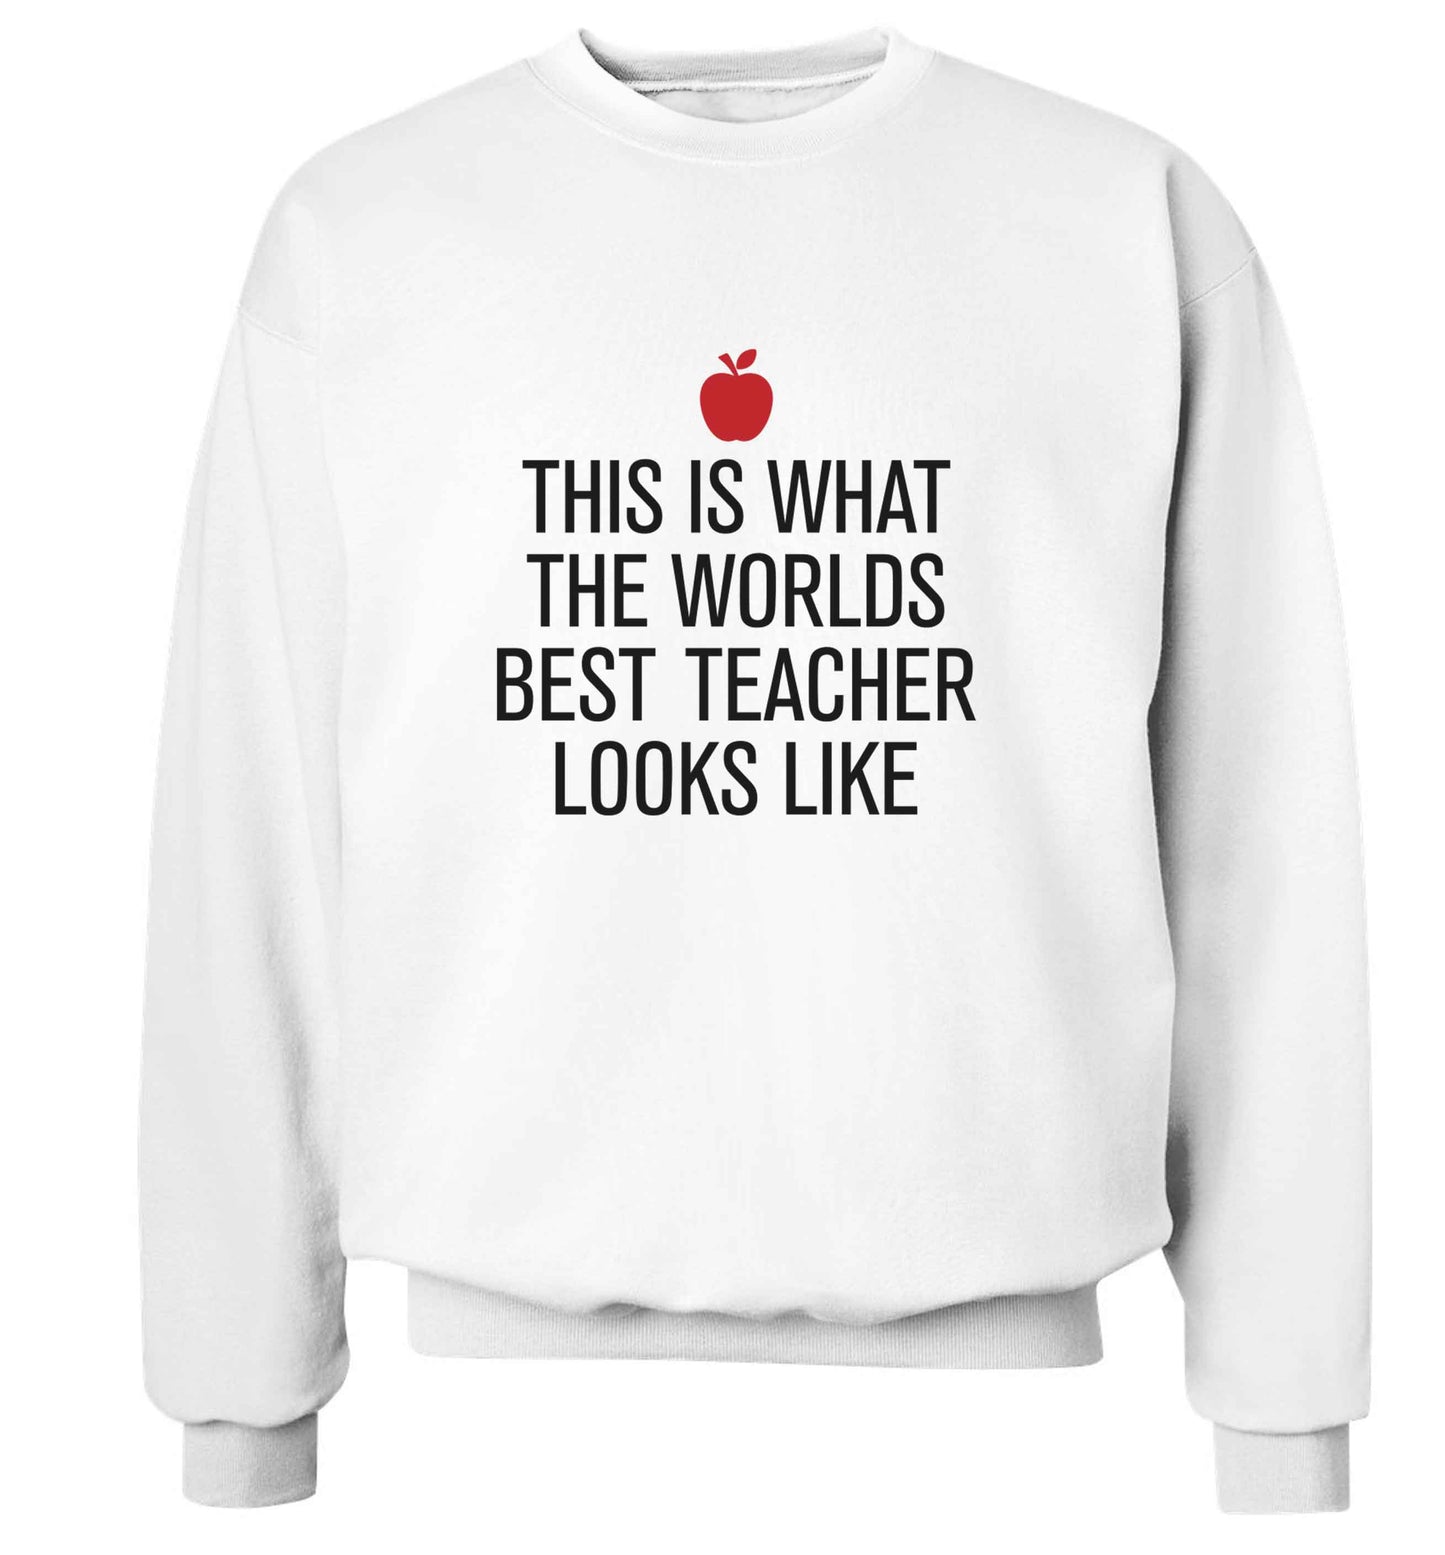 This is what the worlds best teacher looks like adult's unisex white sweater 2XL